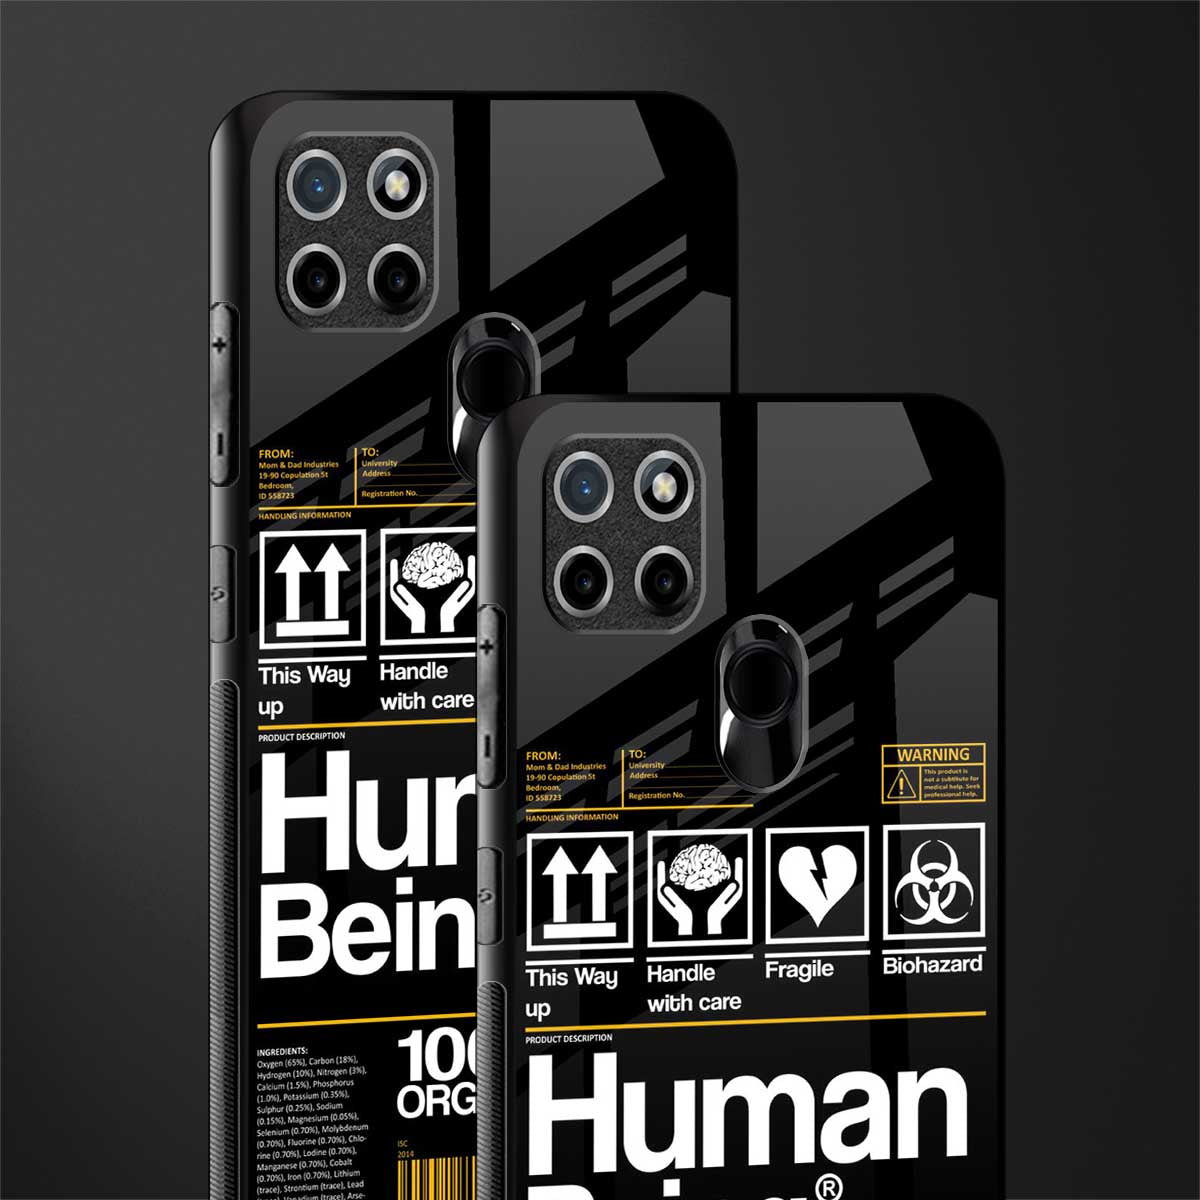 human being label phone cover for realme c25y